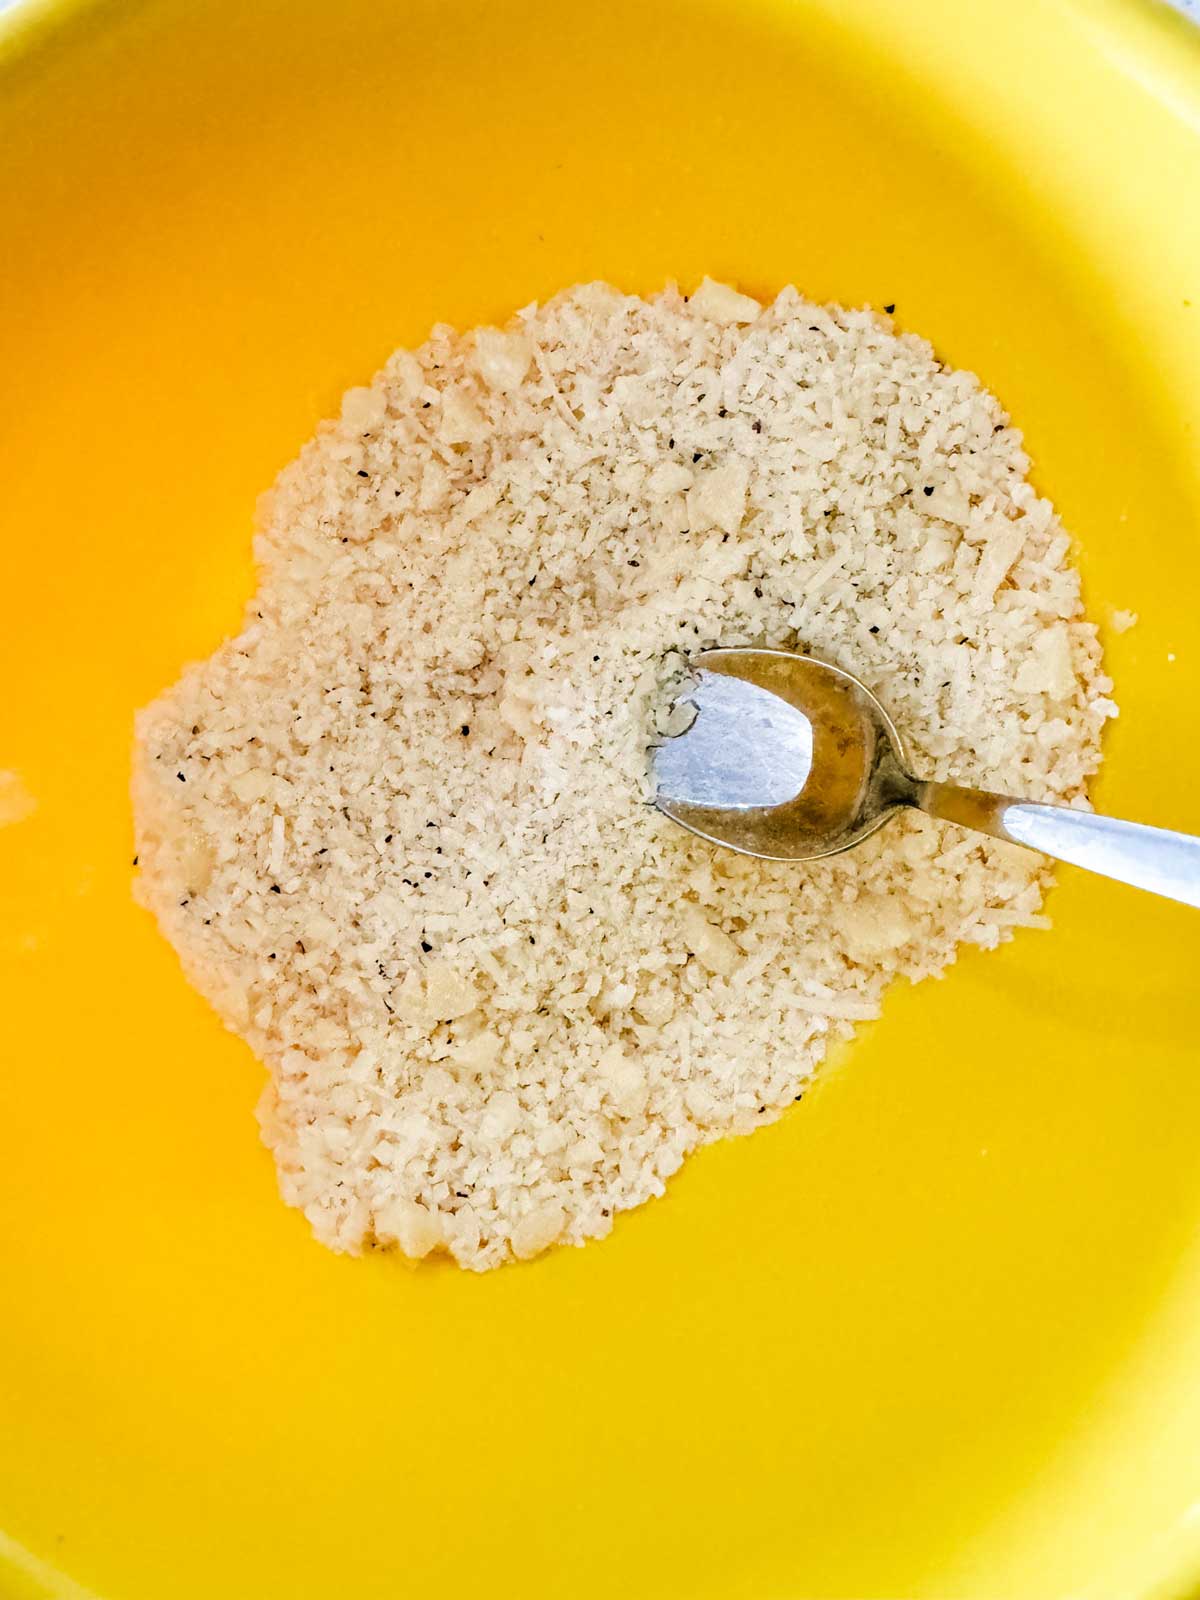 Parmesan cheese, pepper, and arrowroot powder in a yellow bowl.